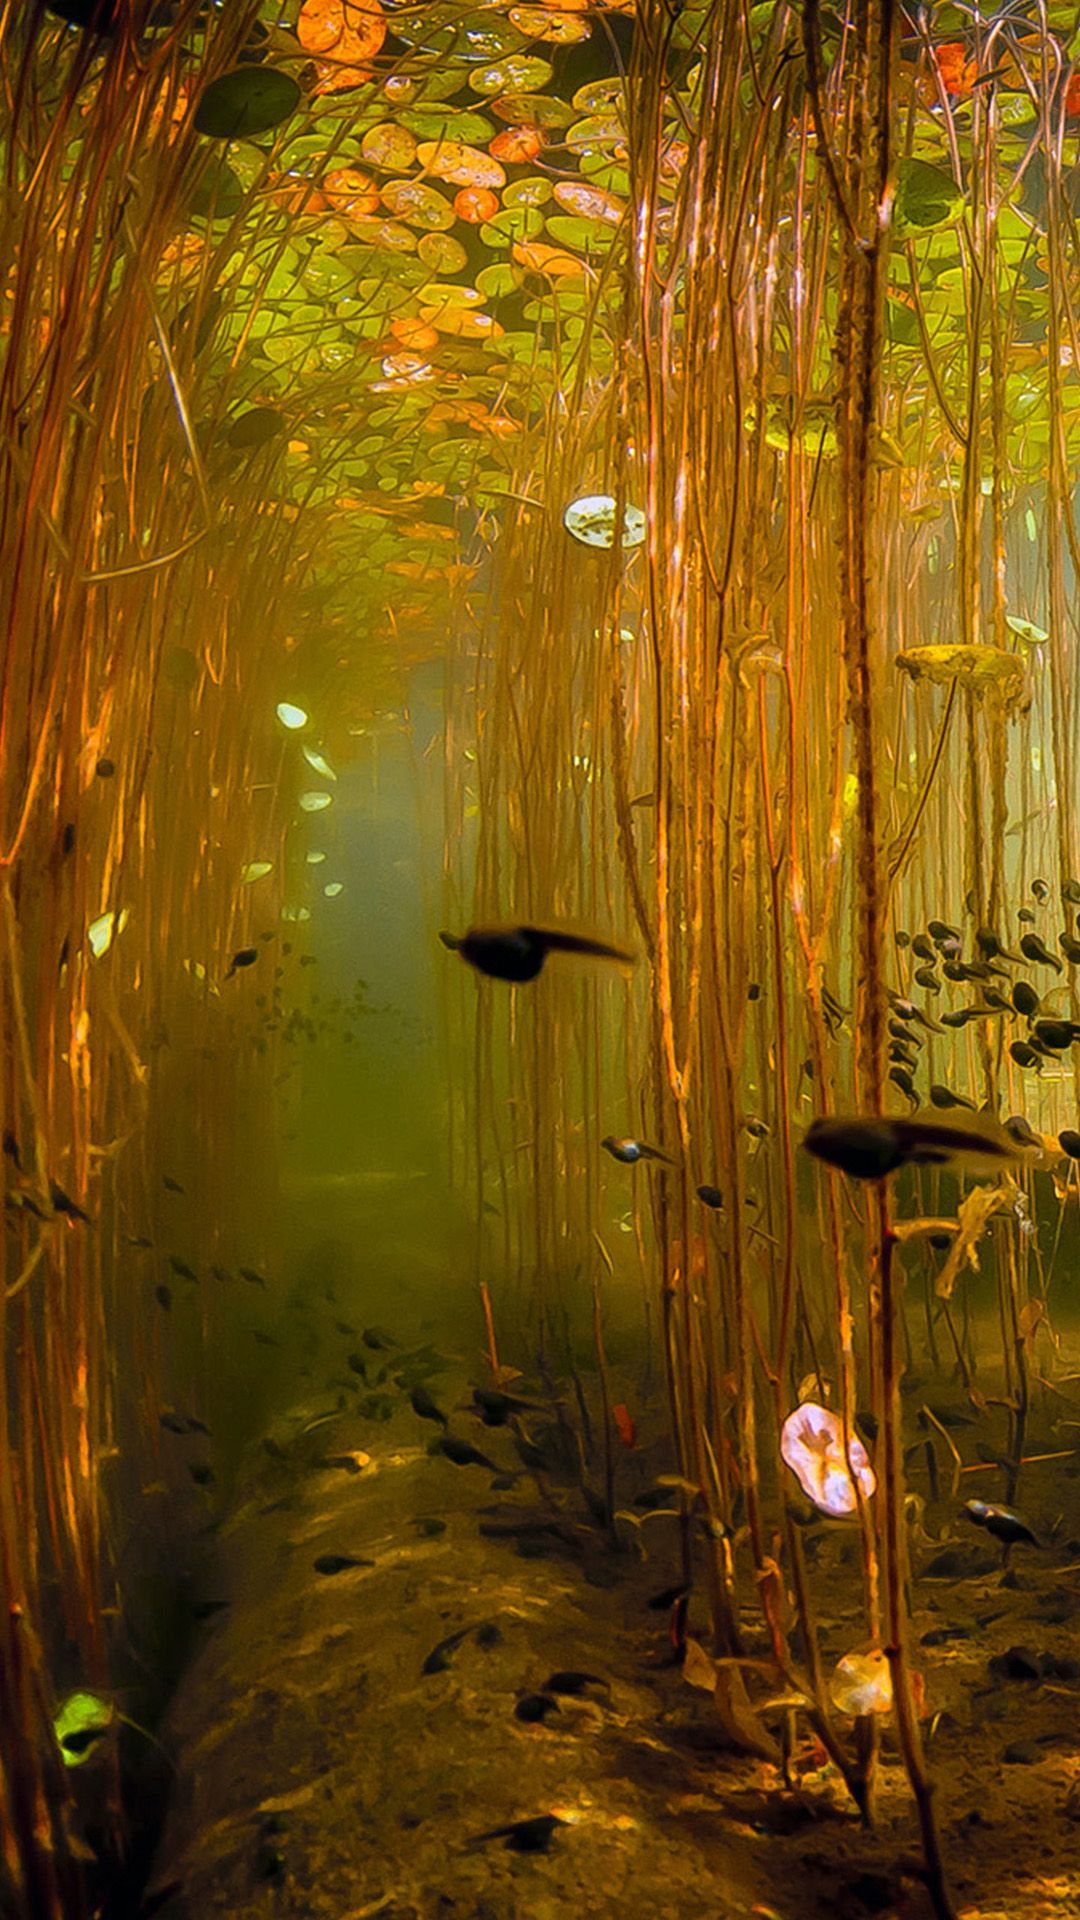 IPhone wallpaper with an underwater view of a pond with fish and plants. - Underwater